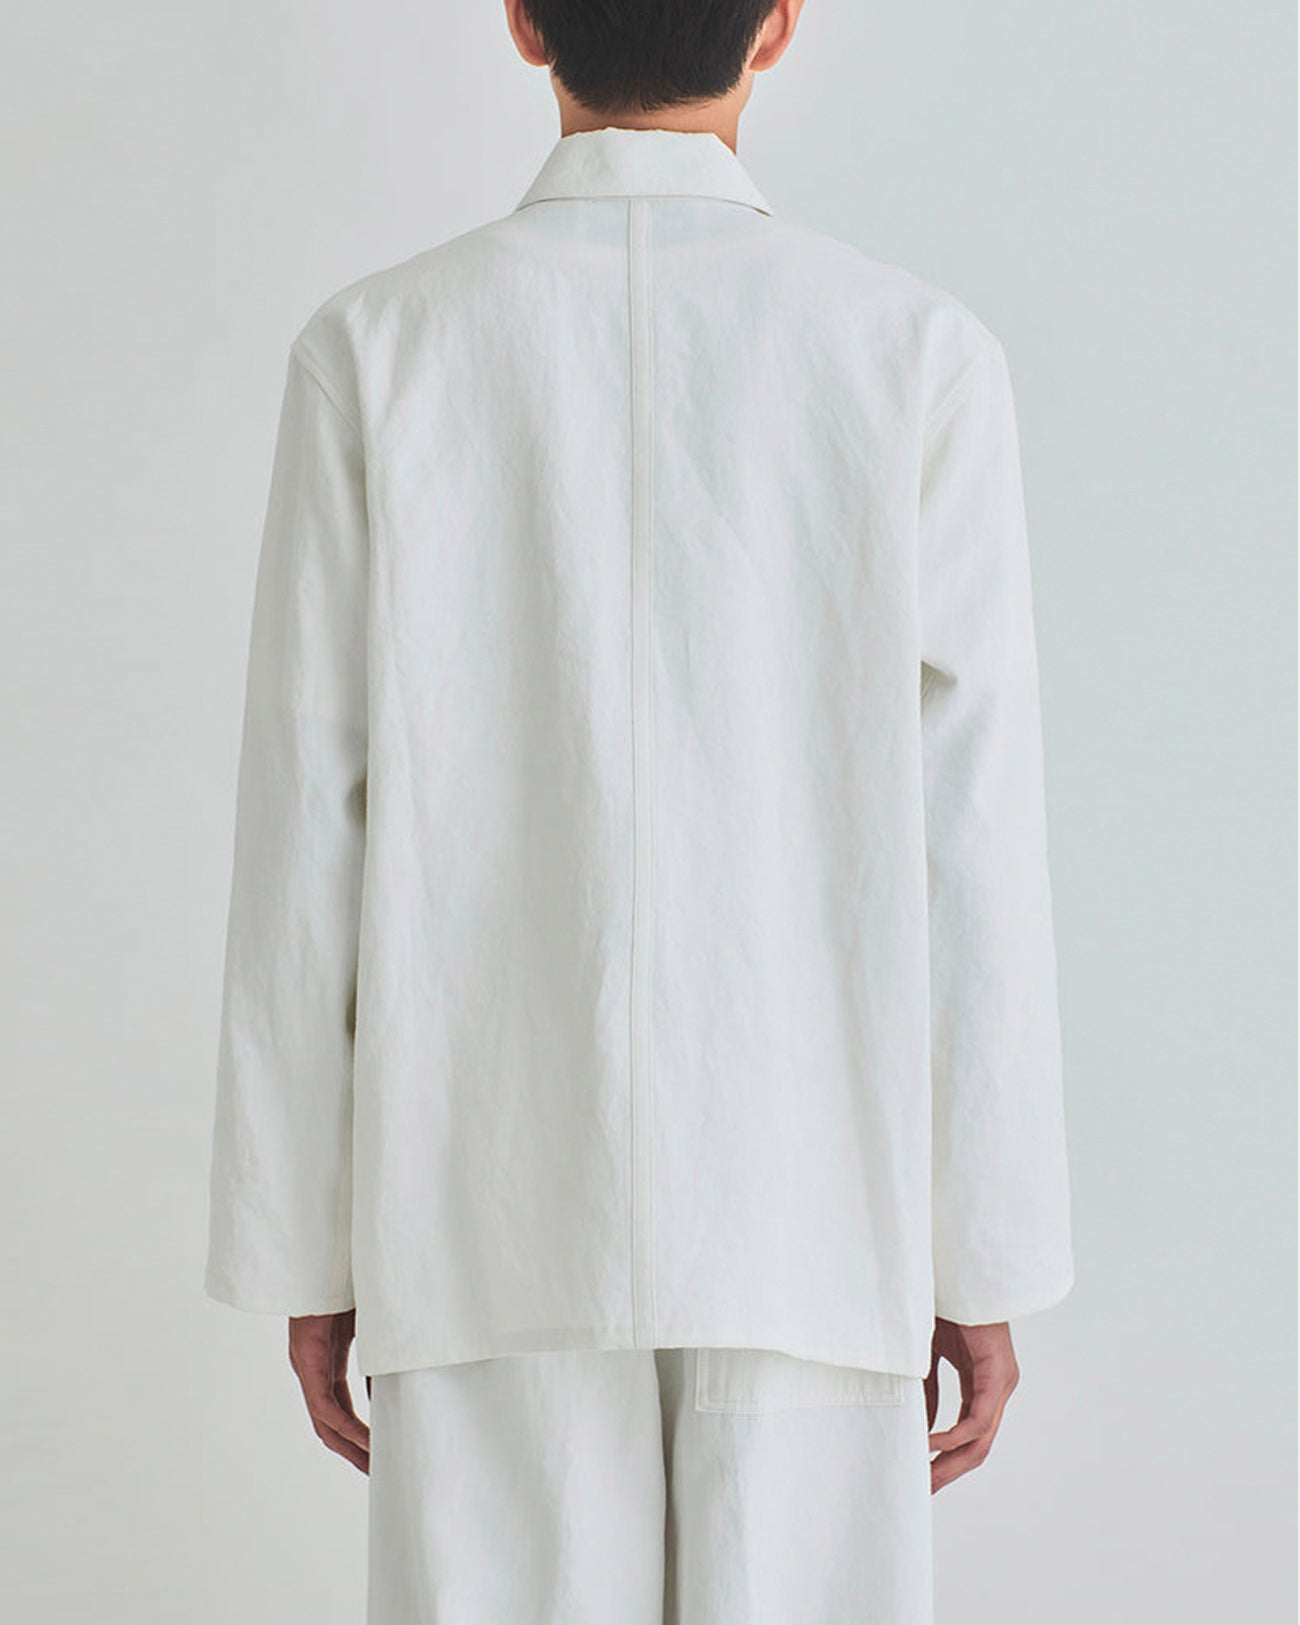 Linen Pigment Chinese JKT - white - FAB4 ONLINE STORE